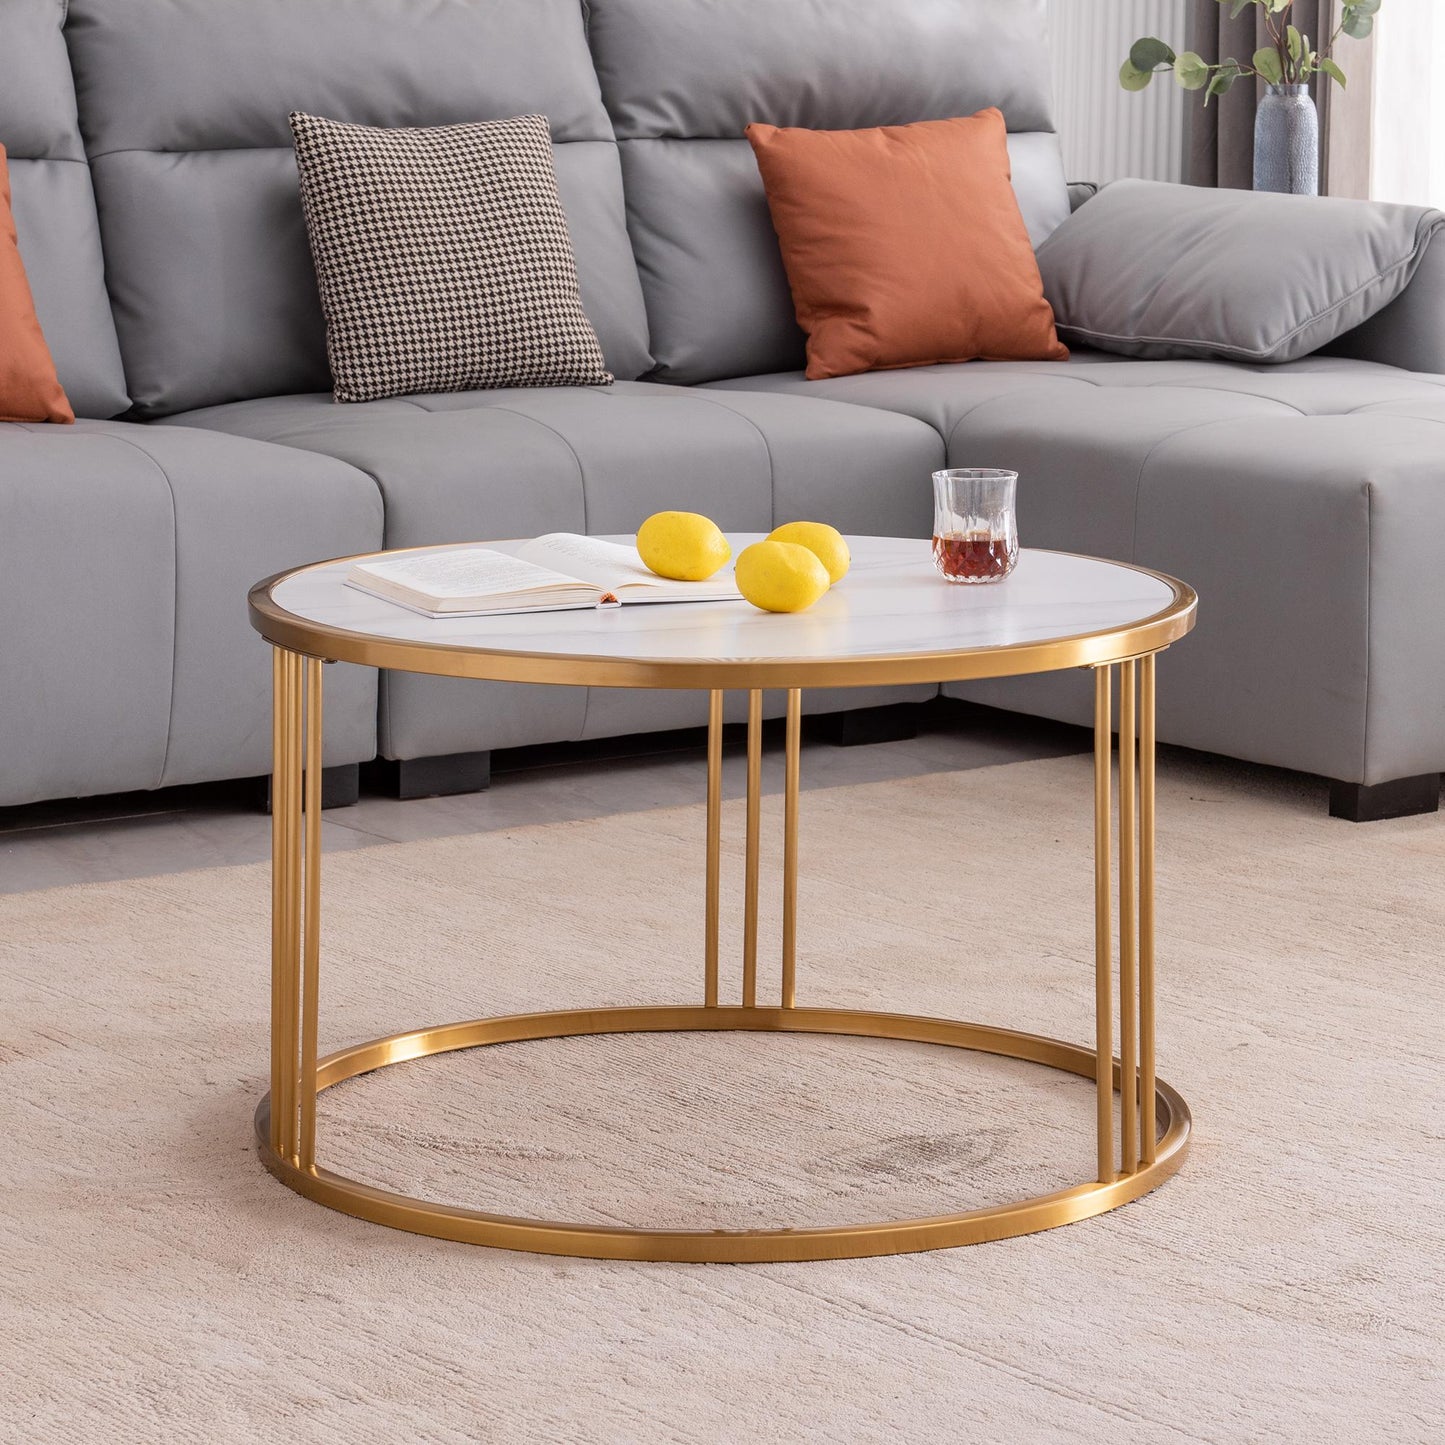 Slate round coffee table with golden stainless steel frame